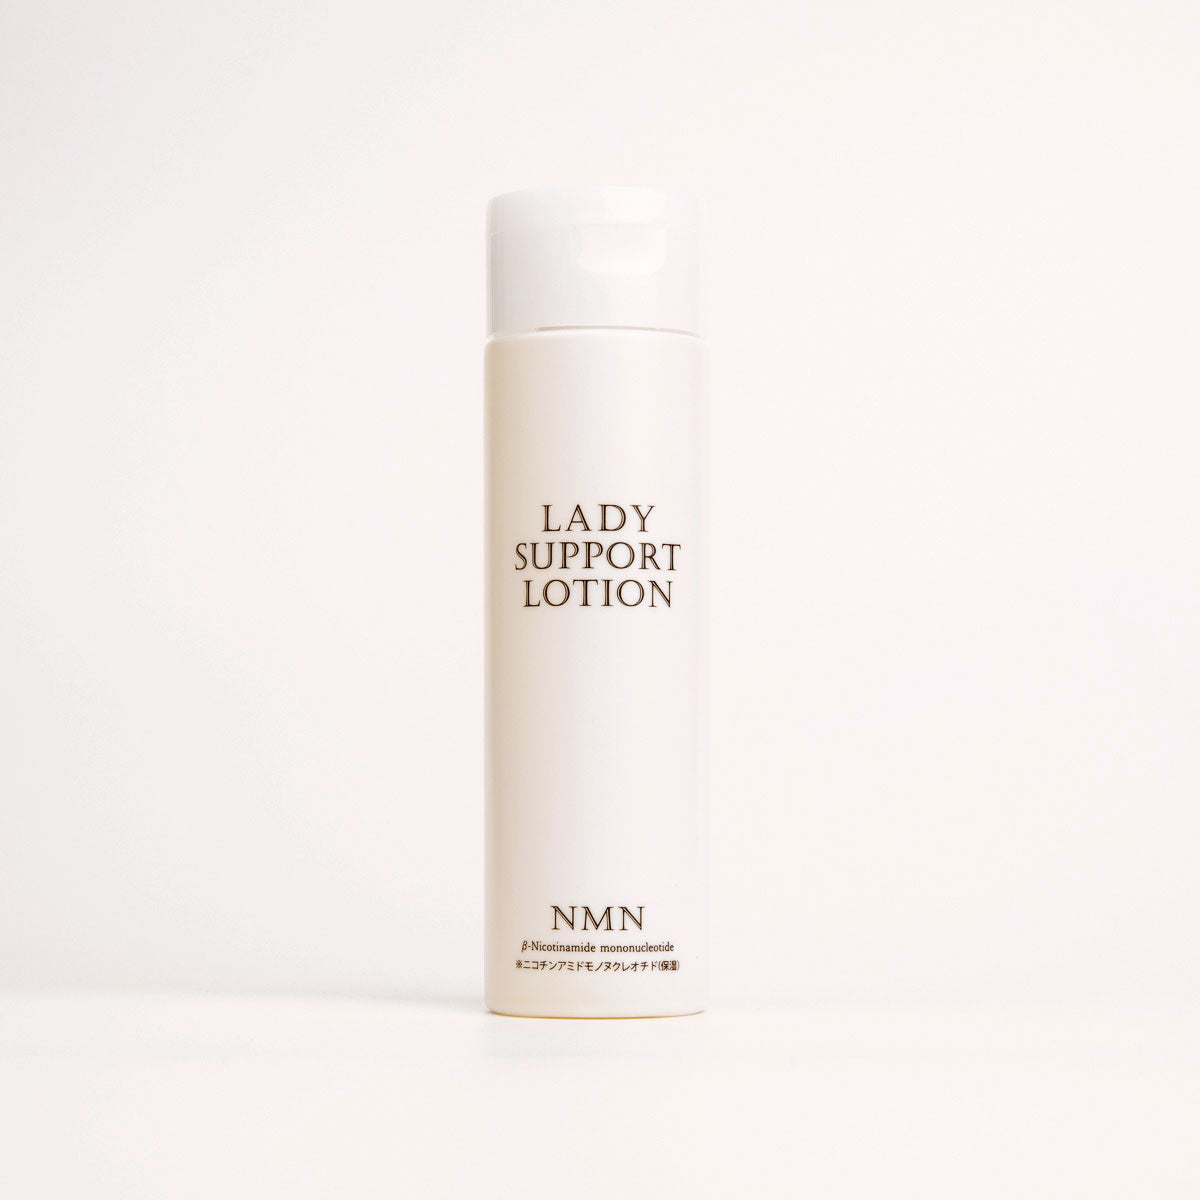 LADY SUPPORT LOTION 「PREGCEIVE」